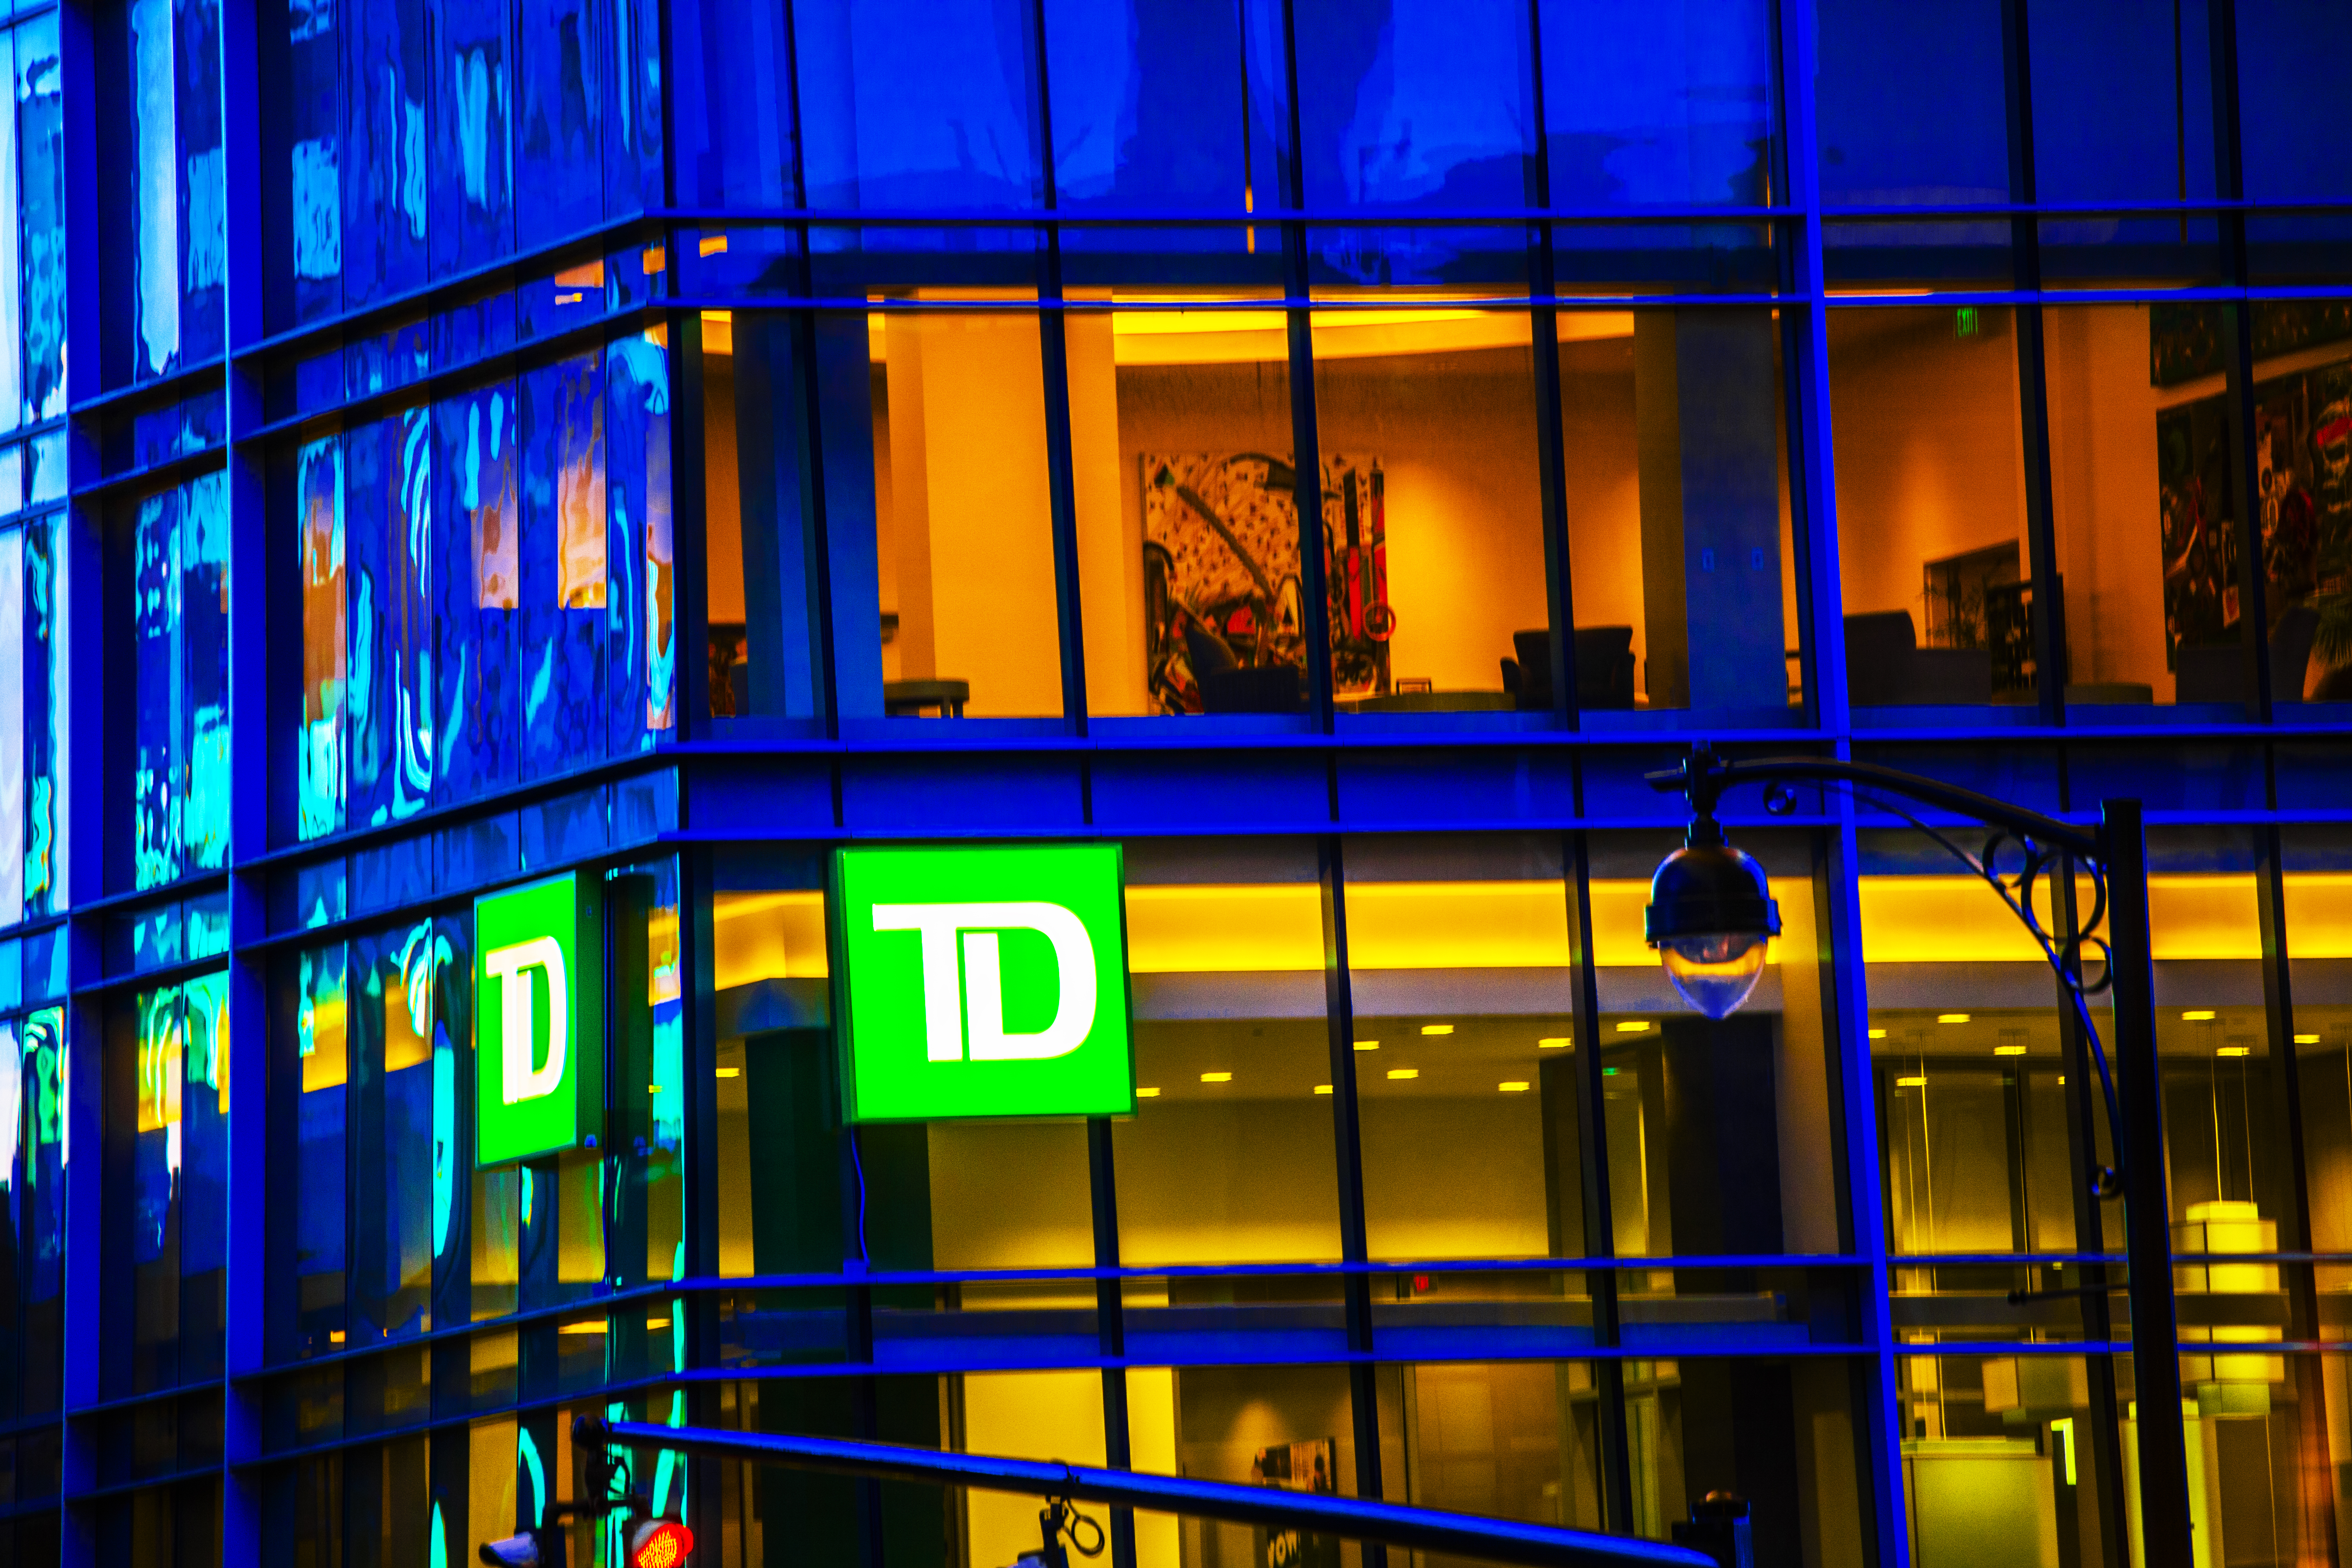 TD Offices at Night